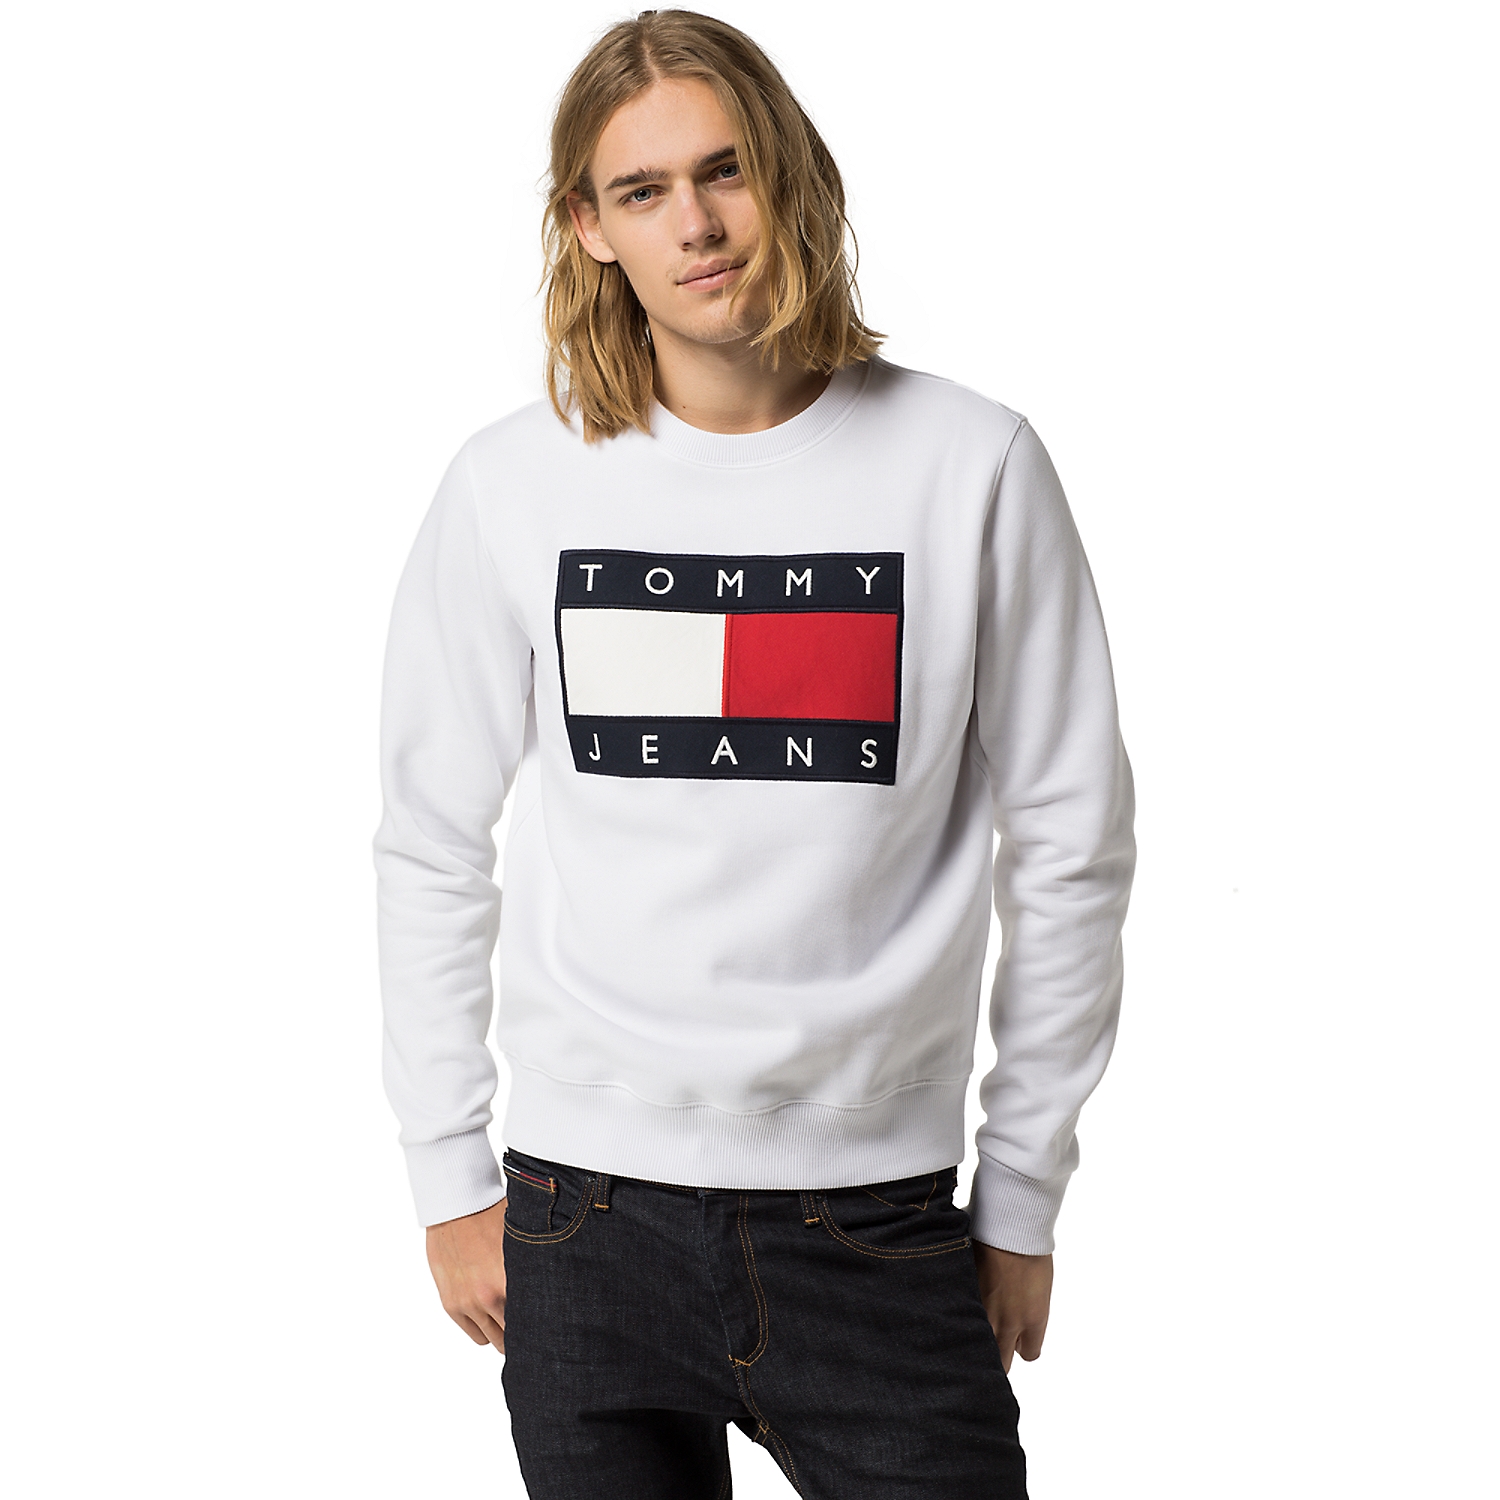 Make a 90s Statement with Tommy Hilfiger's Tommy Jeans Fashions – The ...